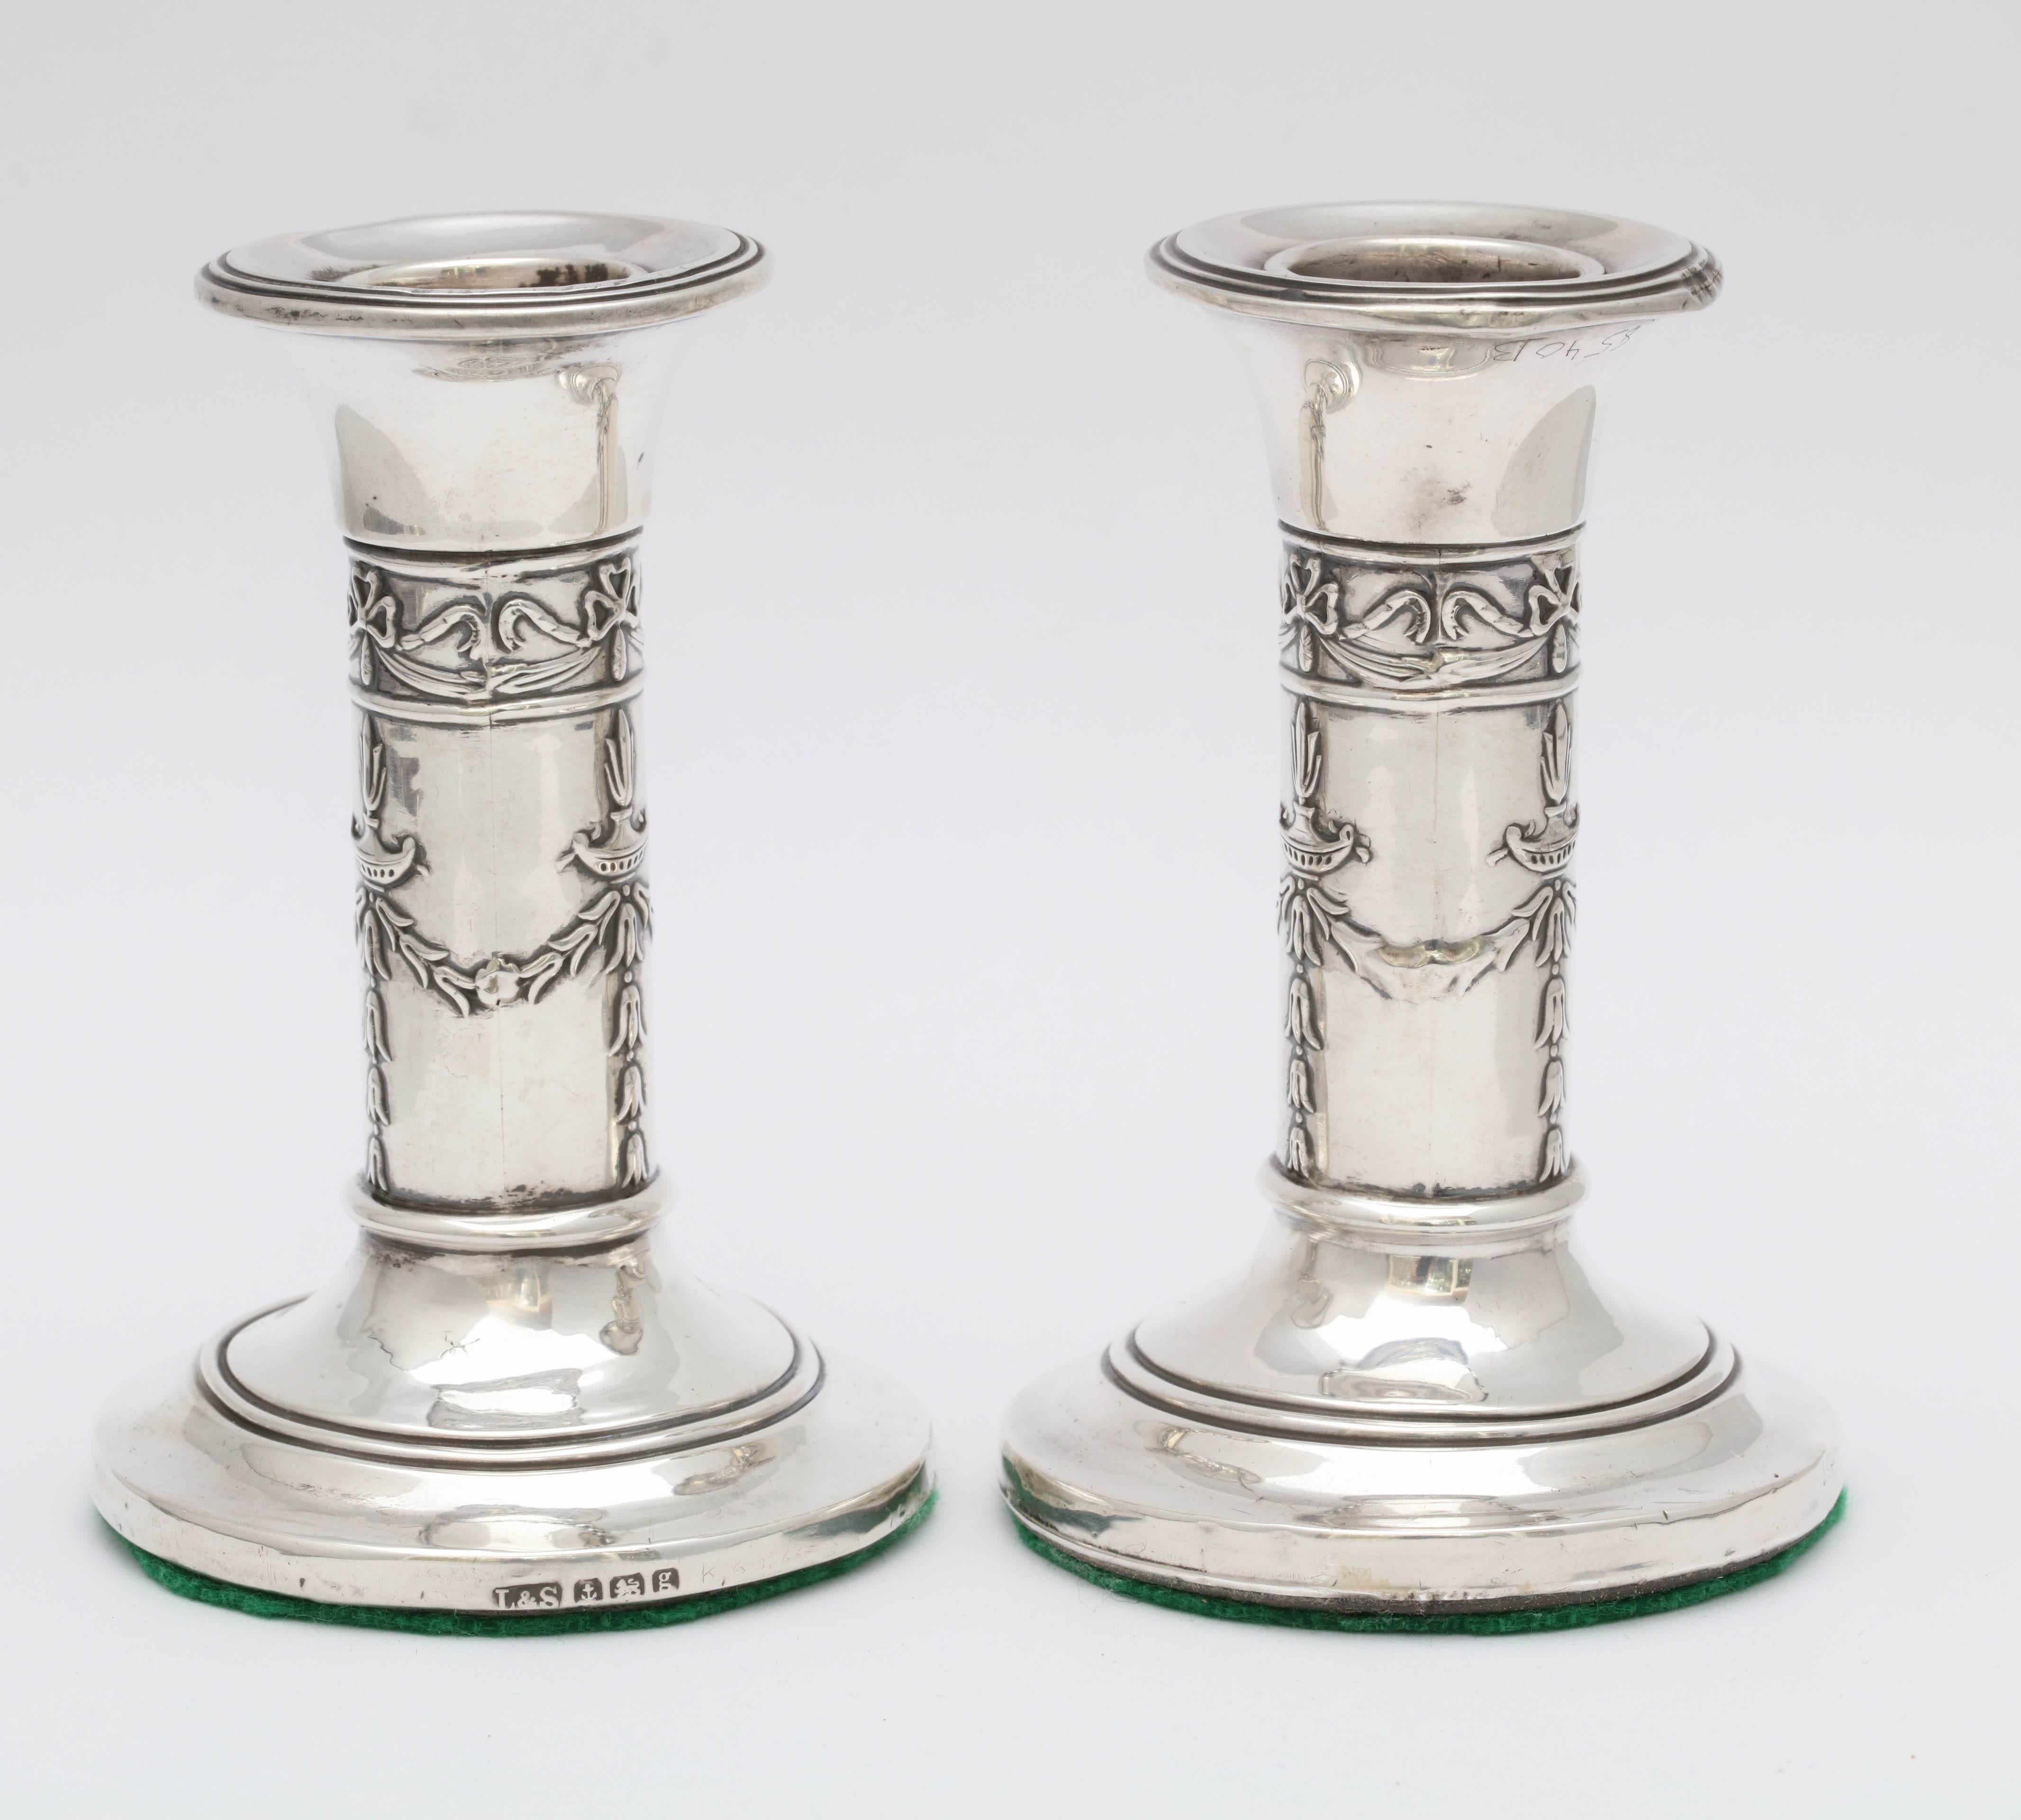 English Pair of Small Edwardian Sterling Silver Candlesticks